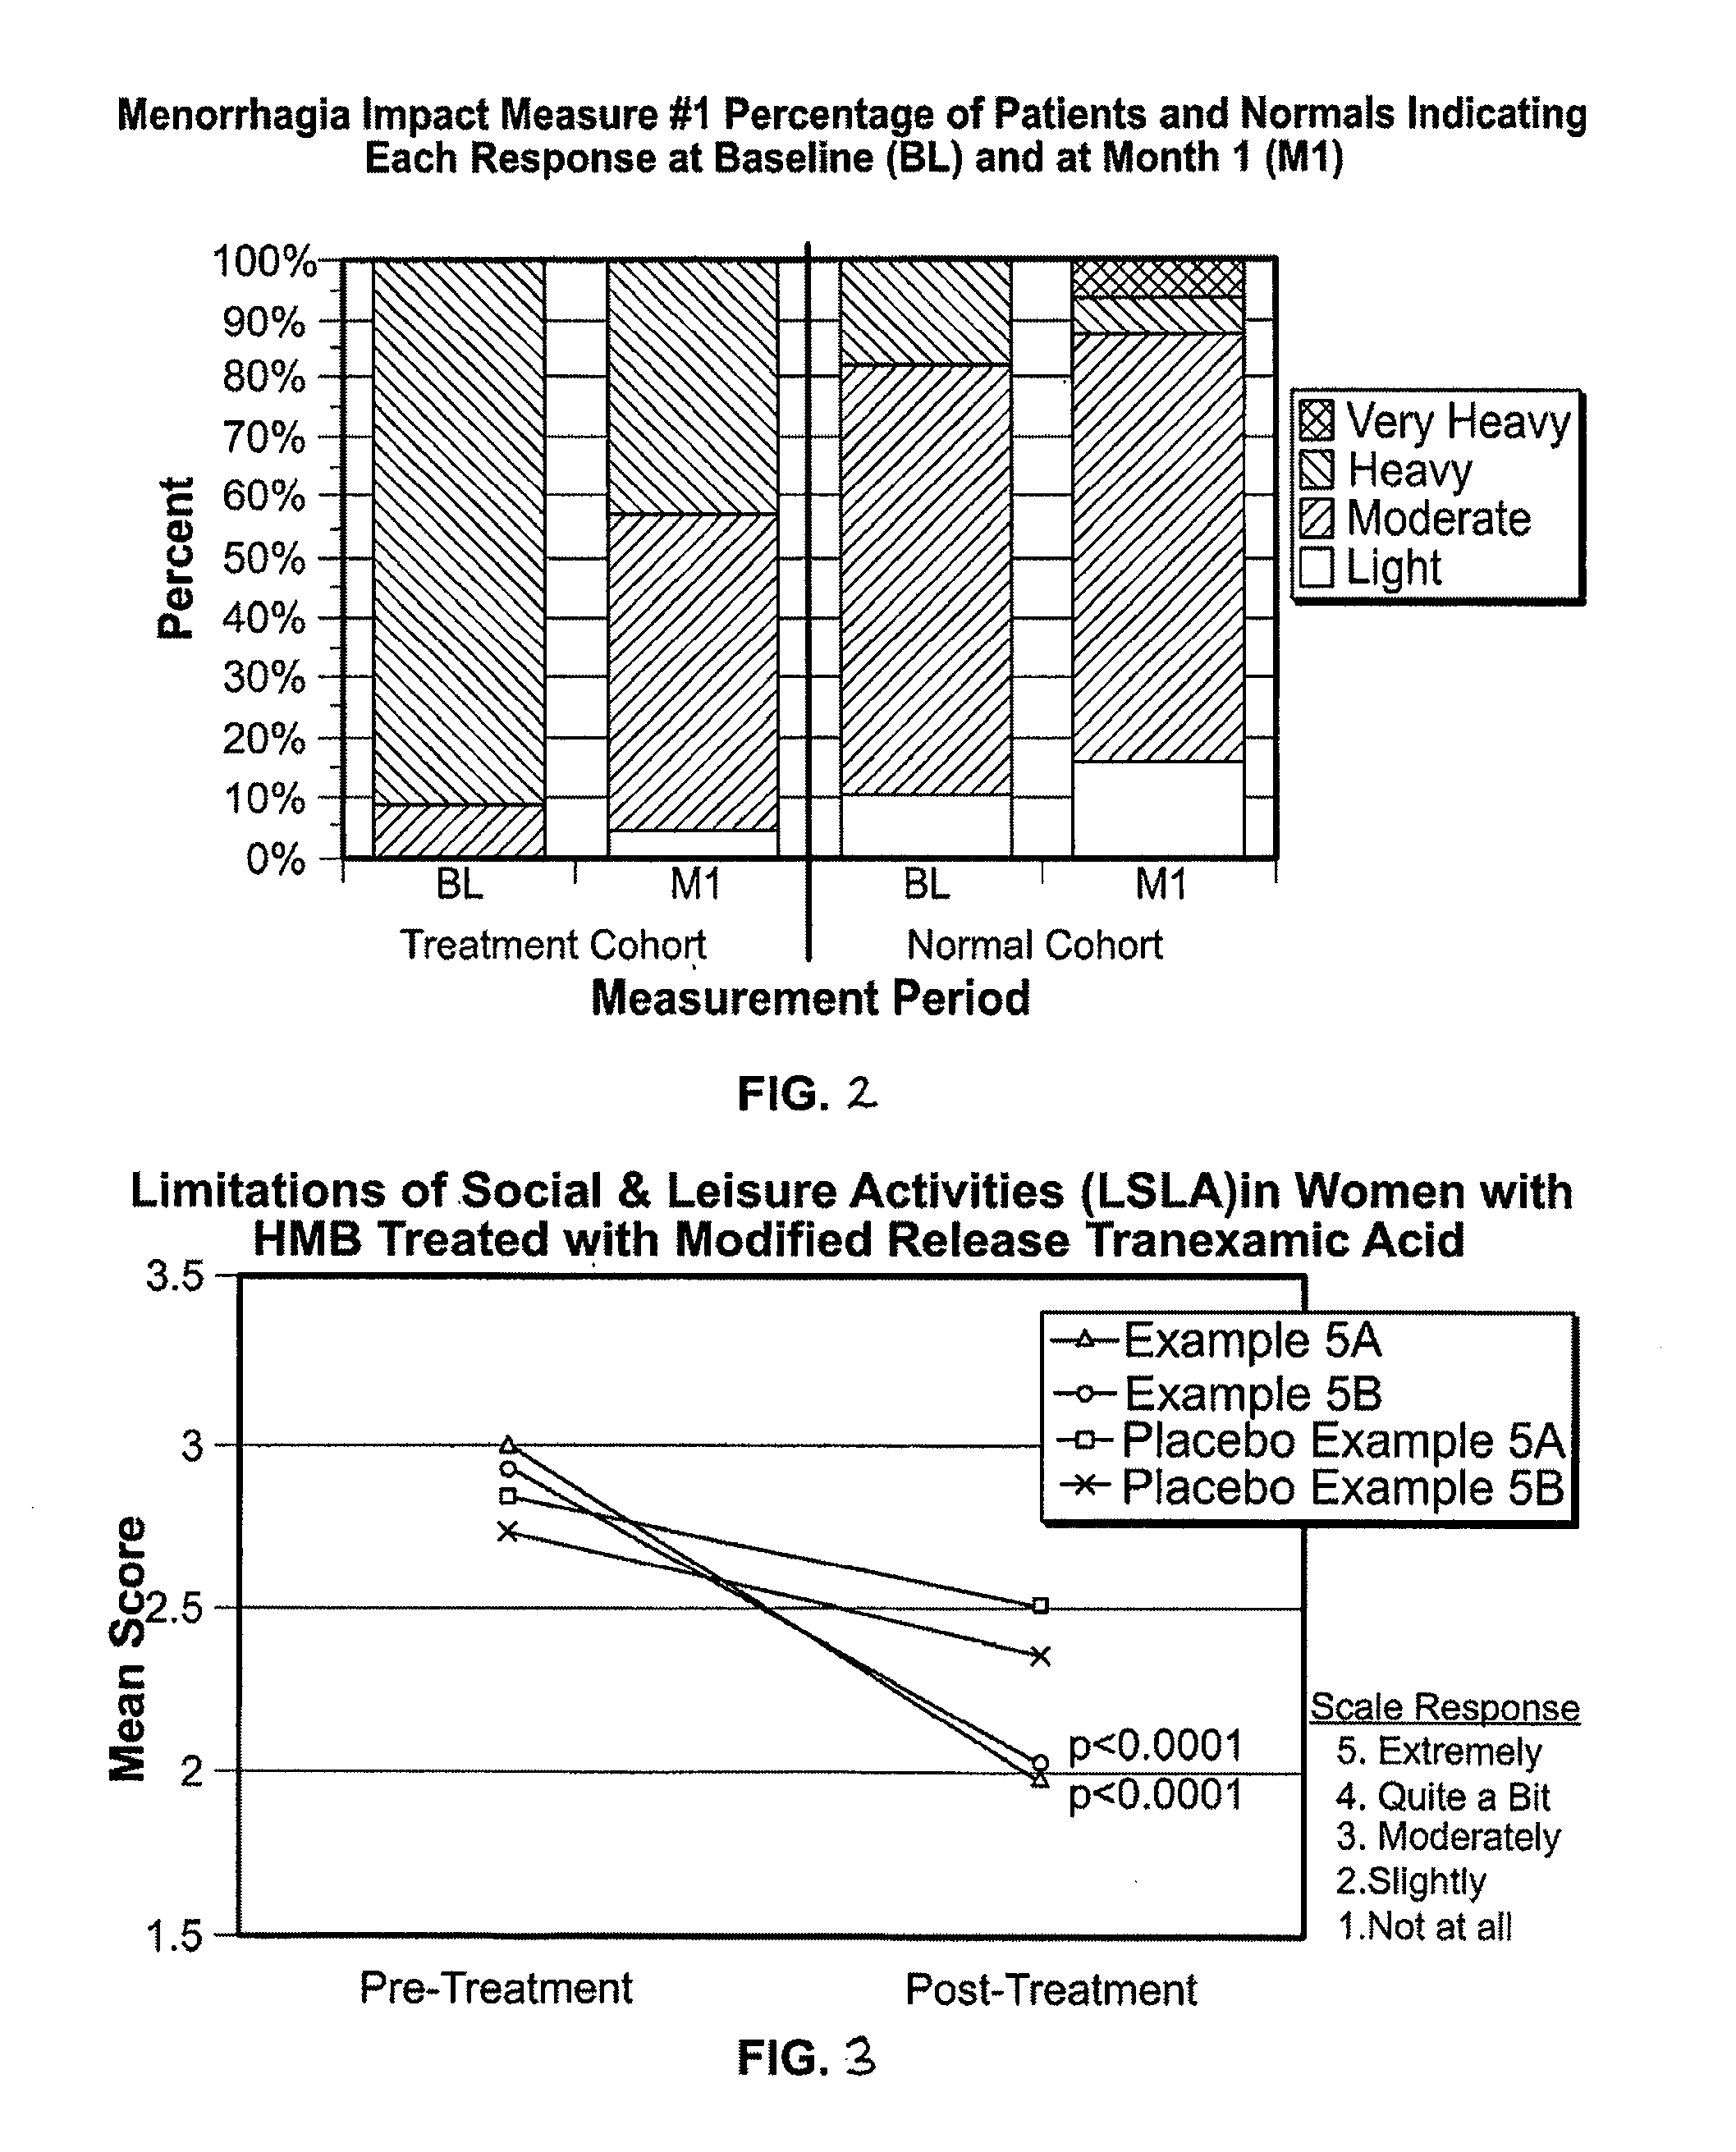 Menorrhagia Instrument and Method for the Treatment of Menstrual Bleeding Disorders